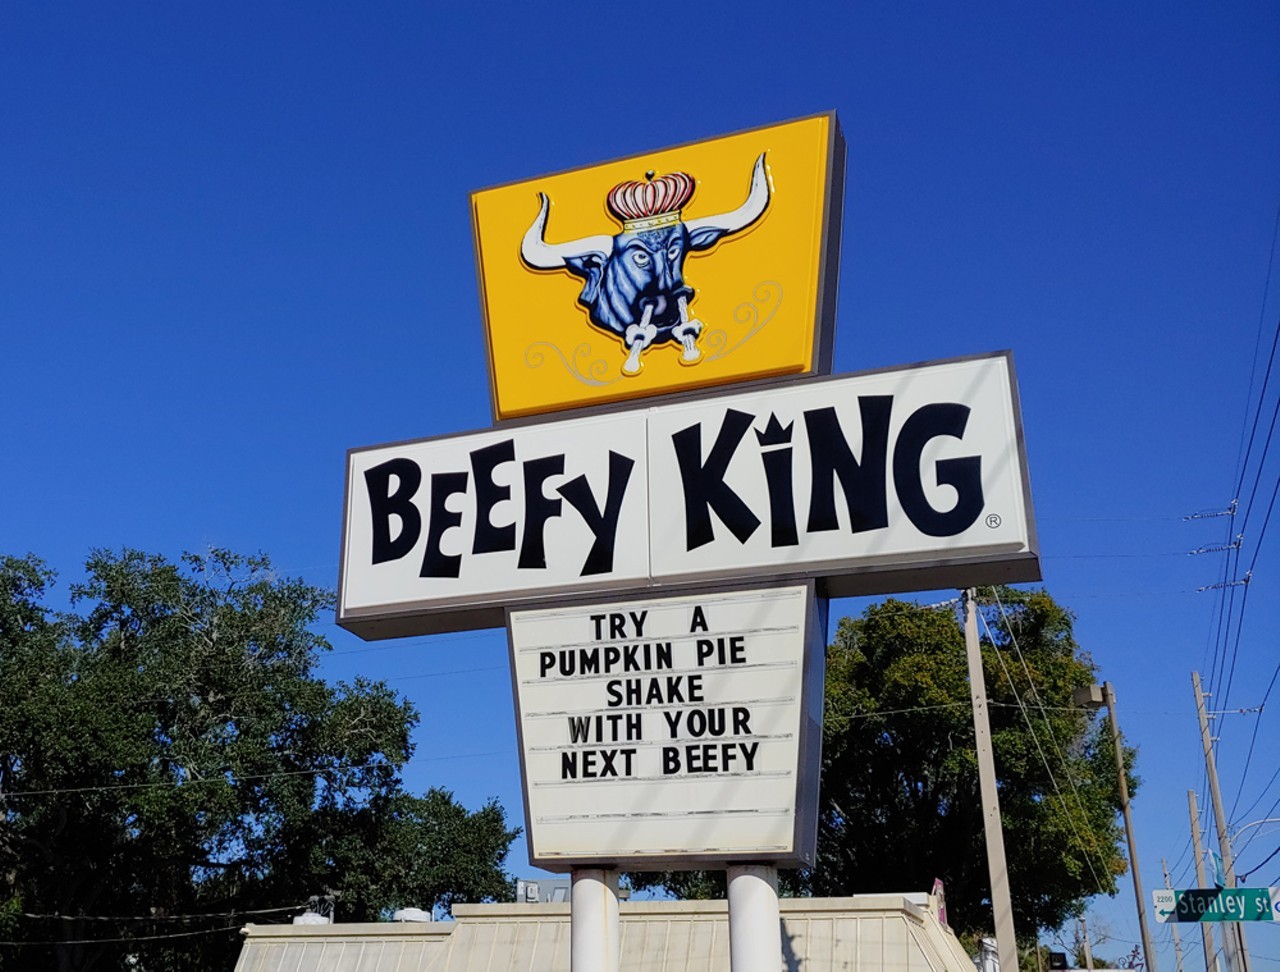 Best Curbside Service
1st: Beefy King, beefyking.com 
2nd: Tijuana Flats, tijuanaflats.com 
3rd: Miller's Ale House, millersalehouse.com 
All Best of Orlando® 2022 winners posted on 8/31/22